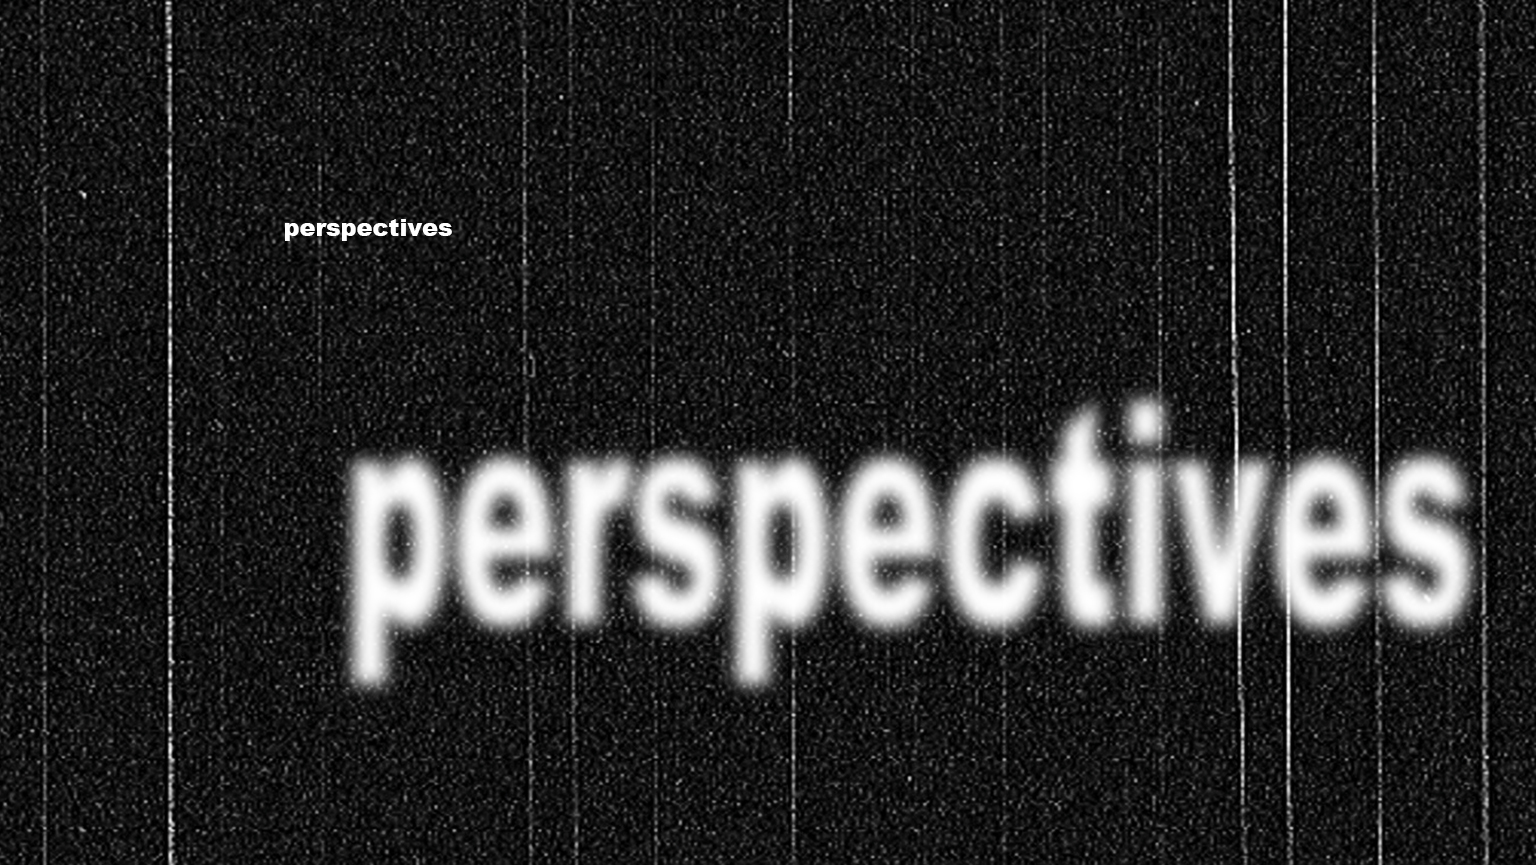 Perspectives